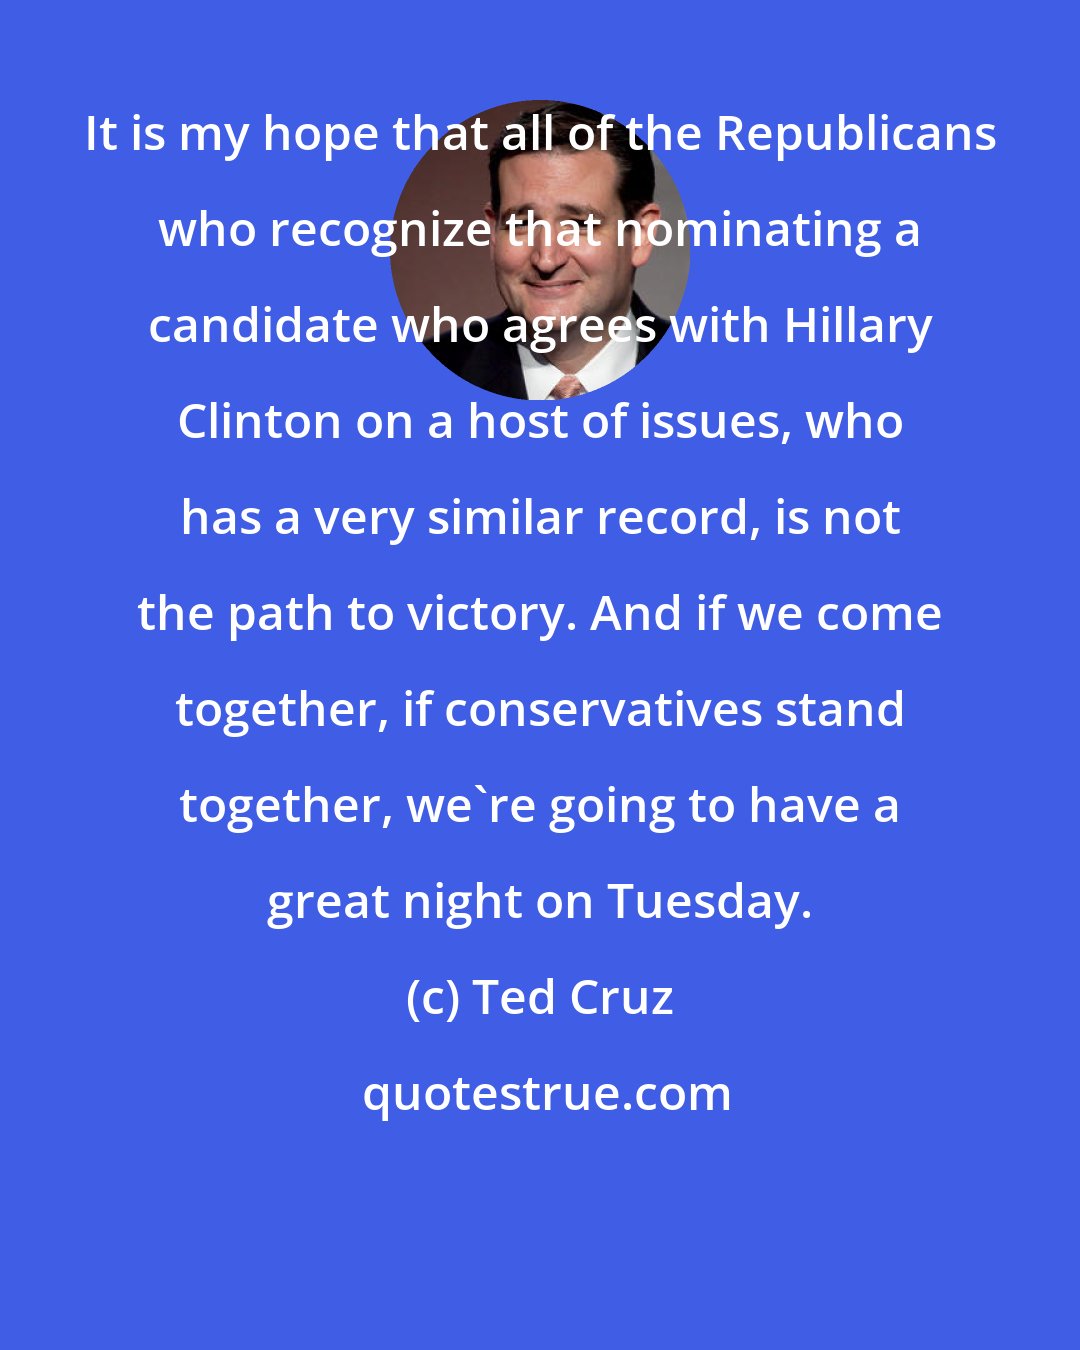 Ted Cruz: It is my hope that all of the Republicans who recognize that nominating a candidate who agrees with Hillary Clinton on a host of issues, who has a very similar record, is not the path to victory. And if we come together, if conservatives stand together, we're going to have a great night on Tuesday.